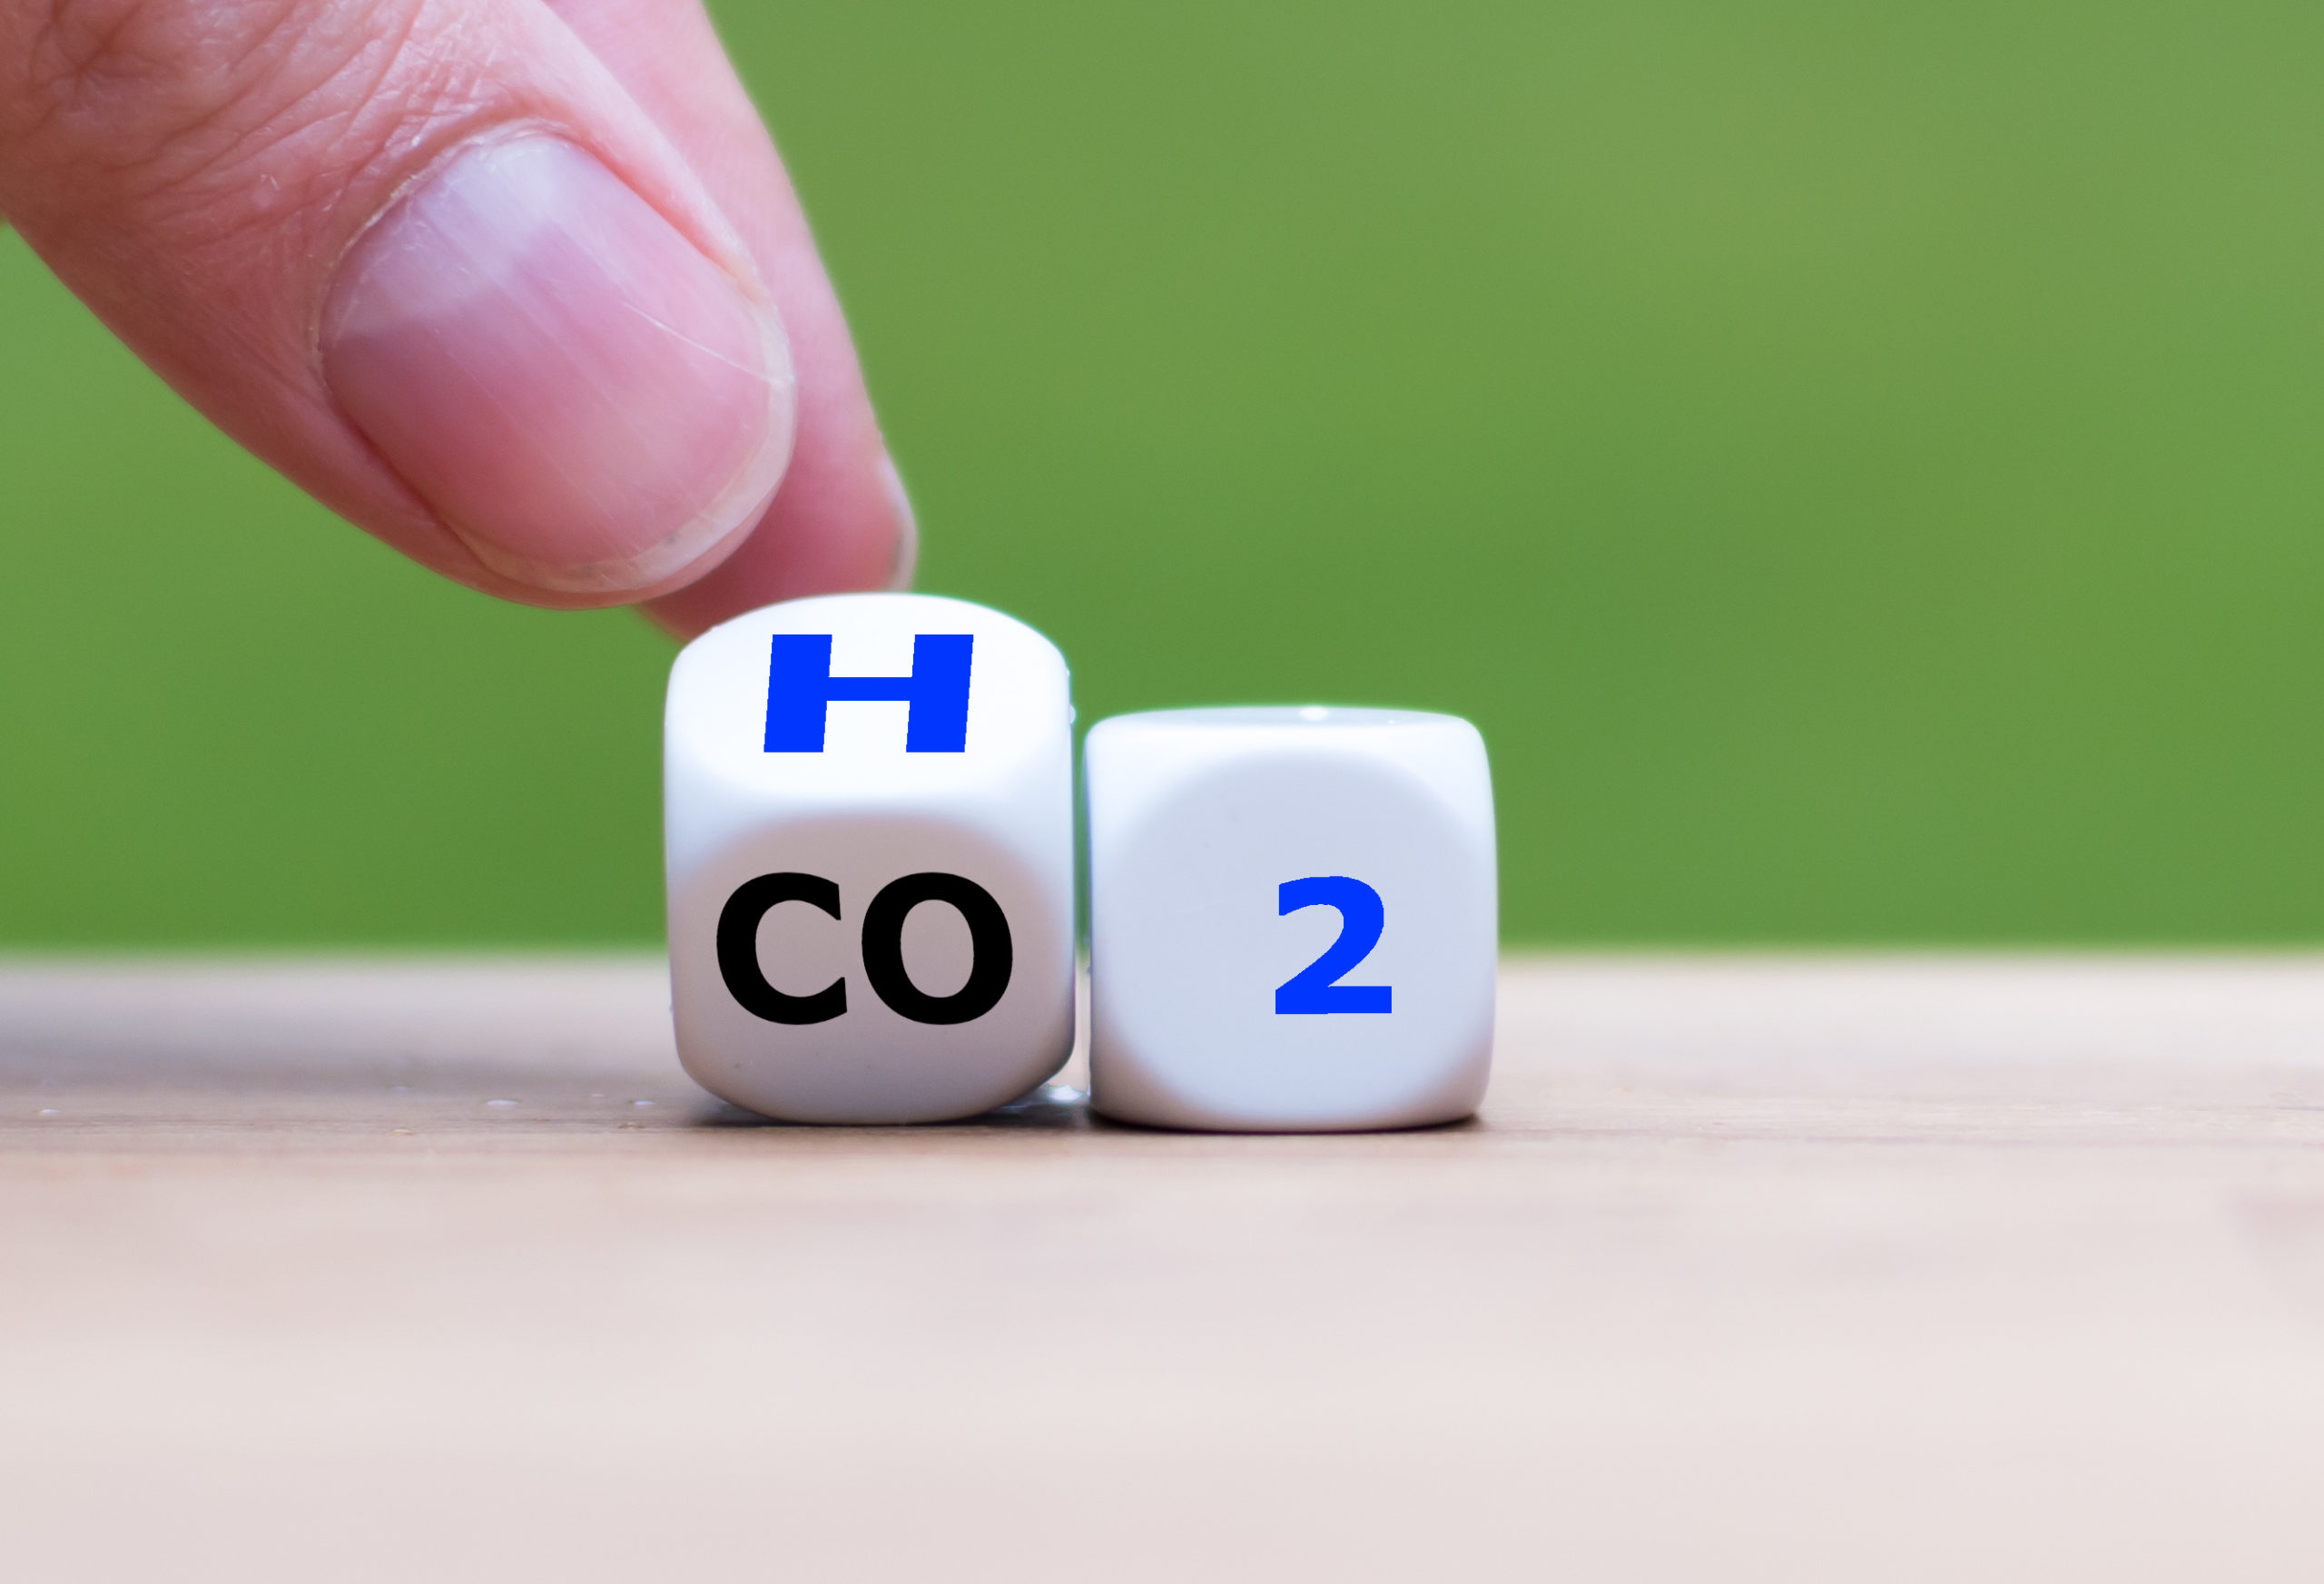 Change to fuel cell vehicles. Hand flips a dice and changes the expression CO2 to H2 / AdobeStock/Patrycja Rapacka